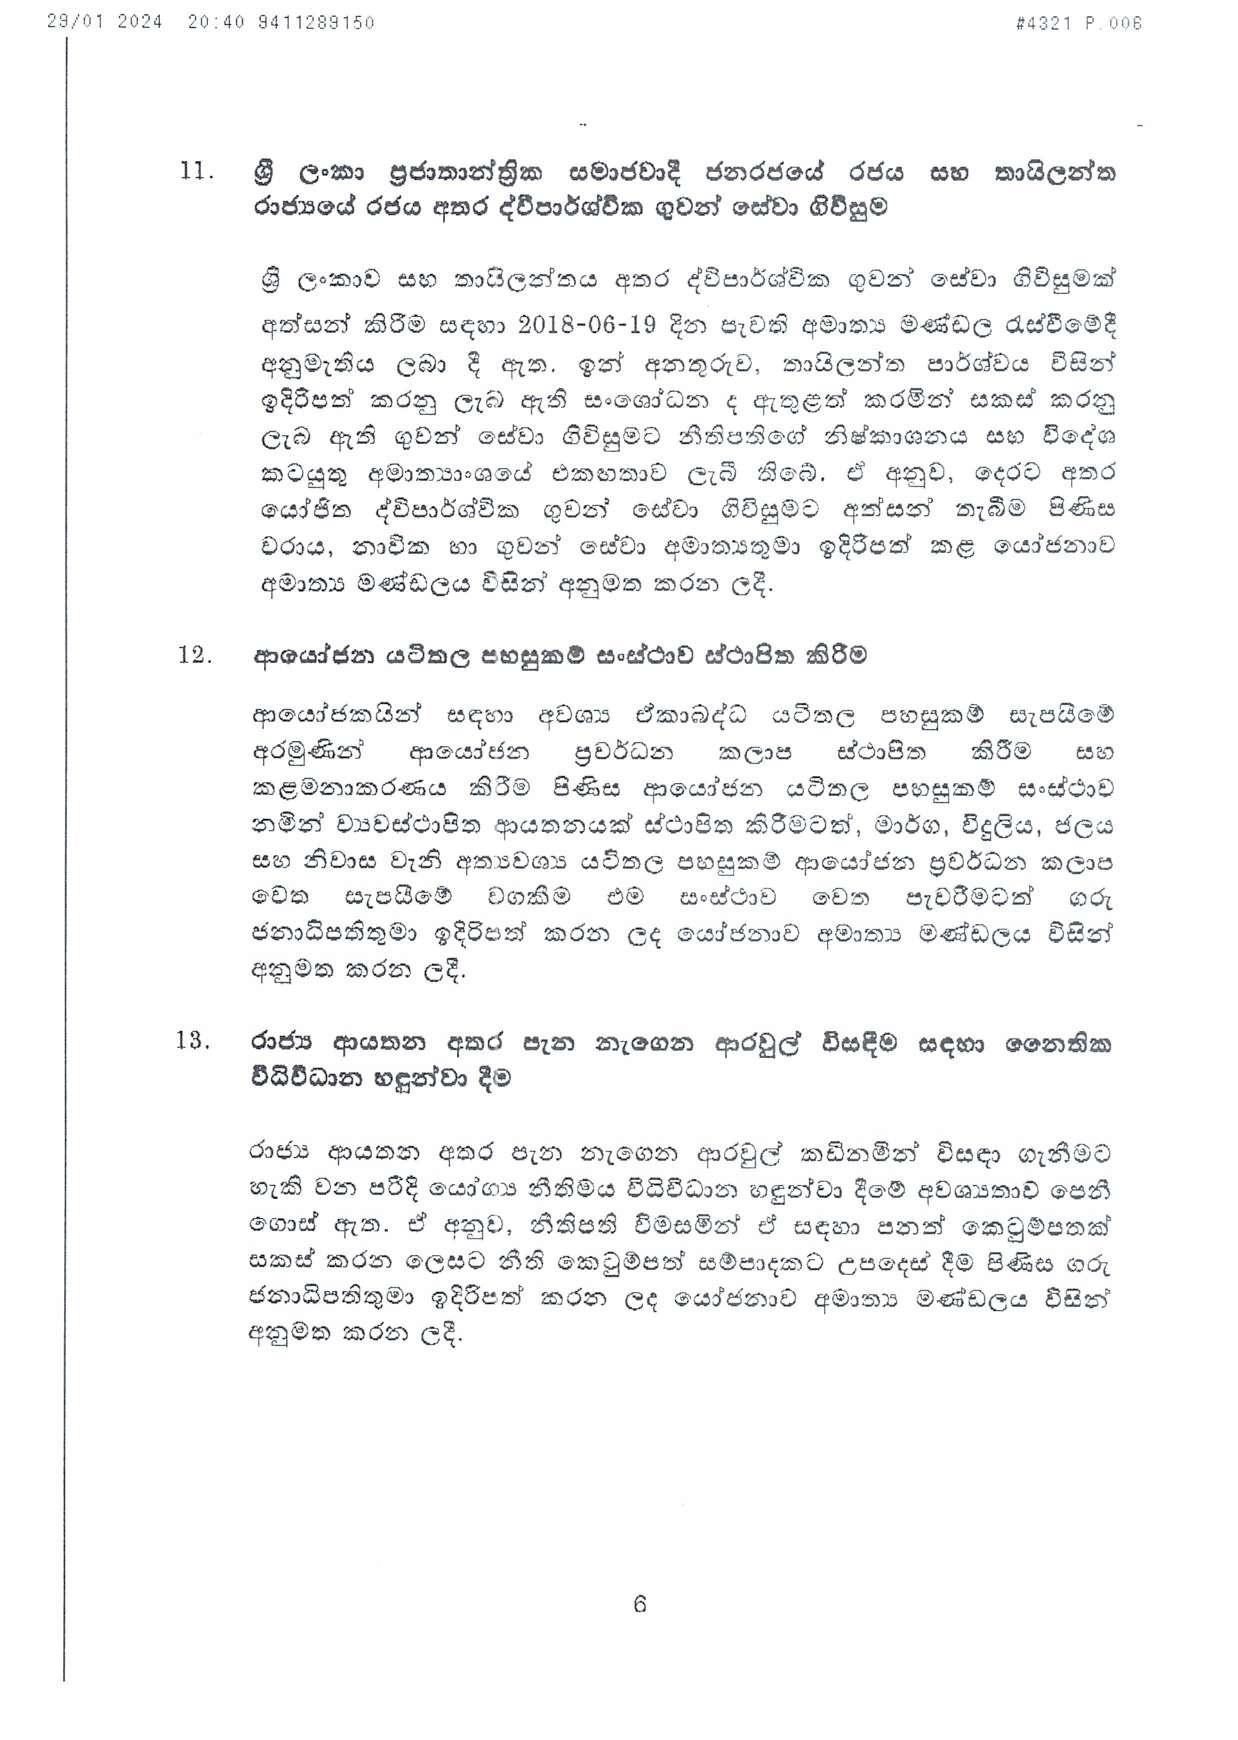 Cabinet Decisions on 29.01.2024 compressed page 006